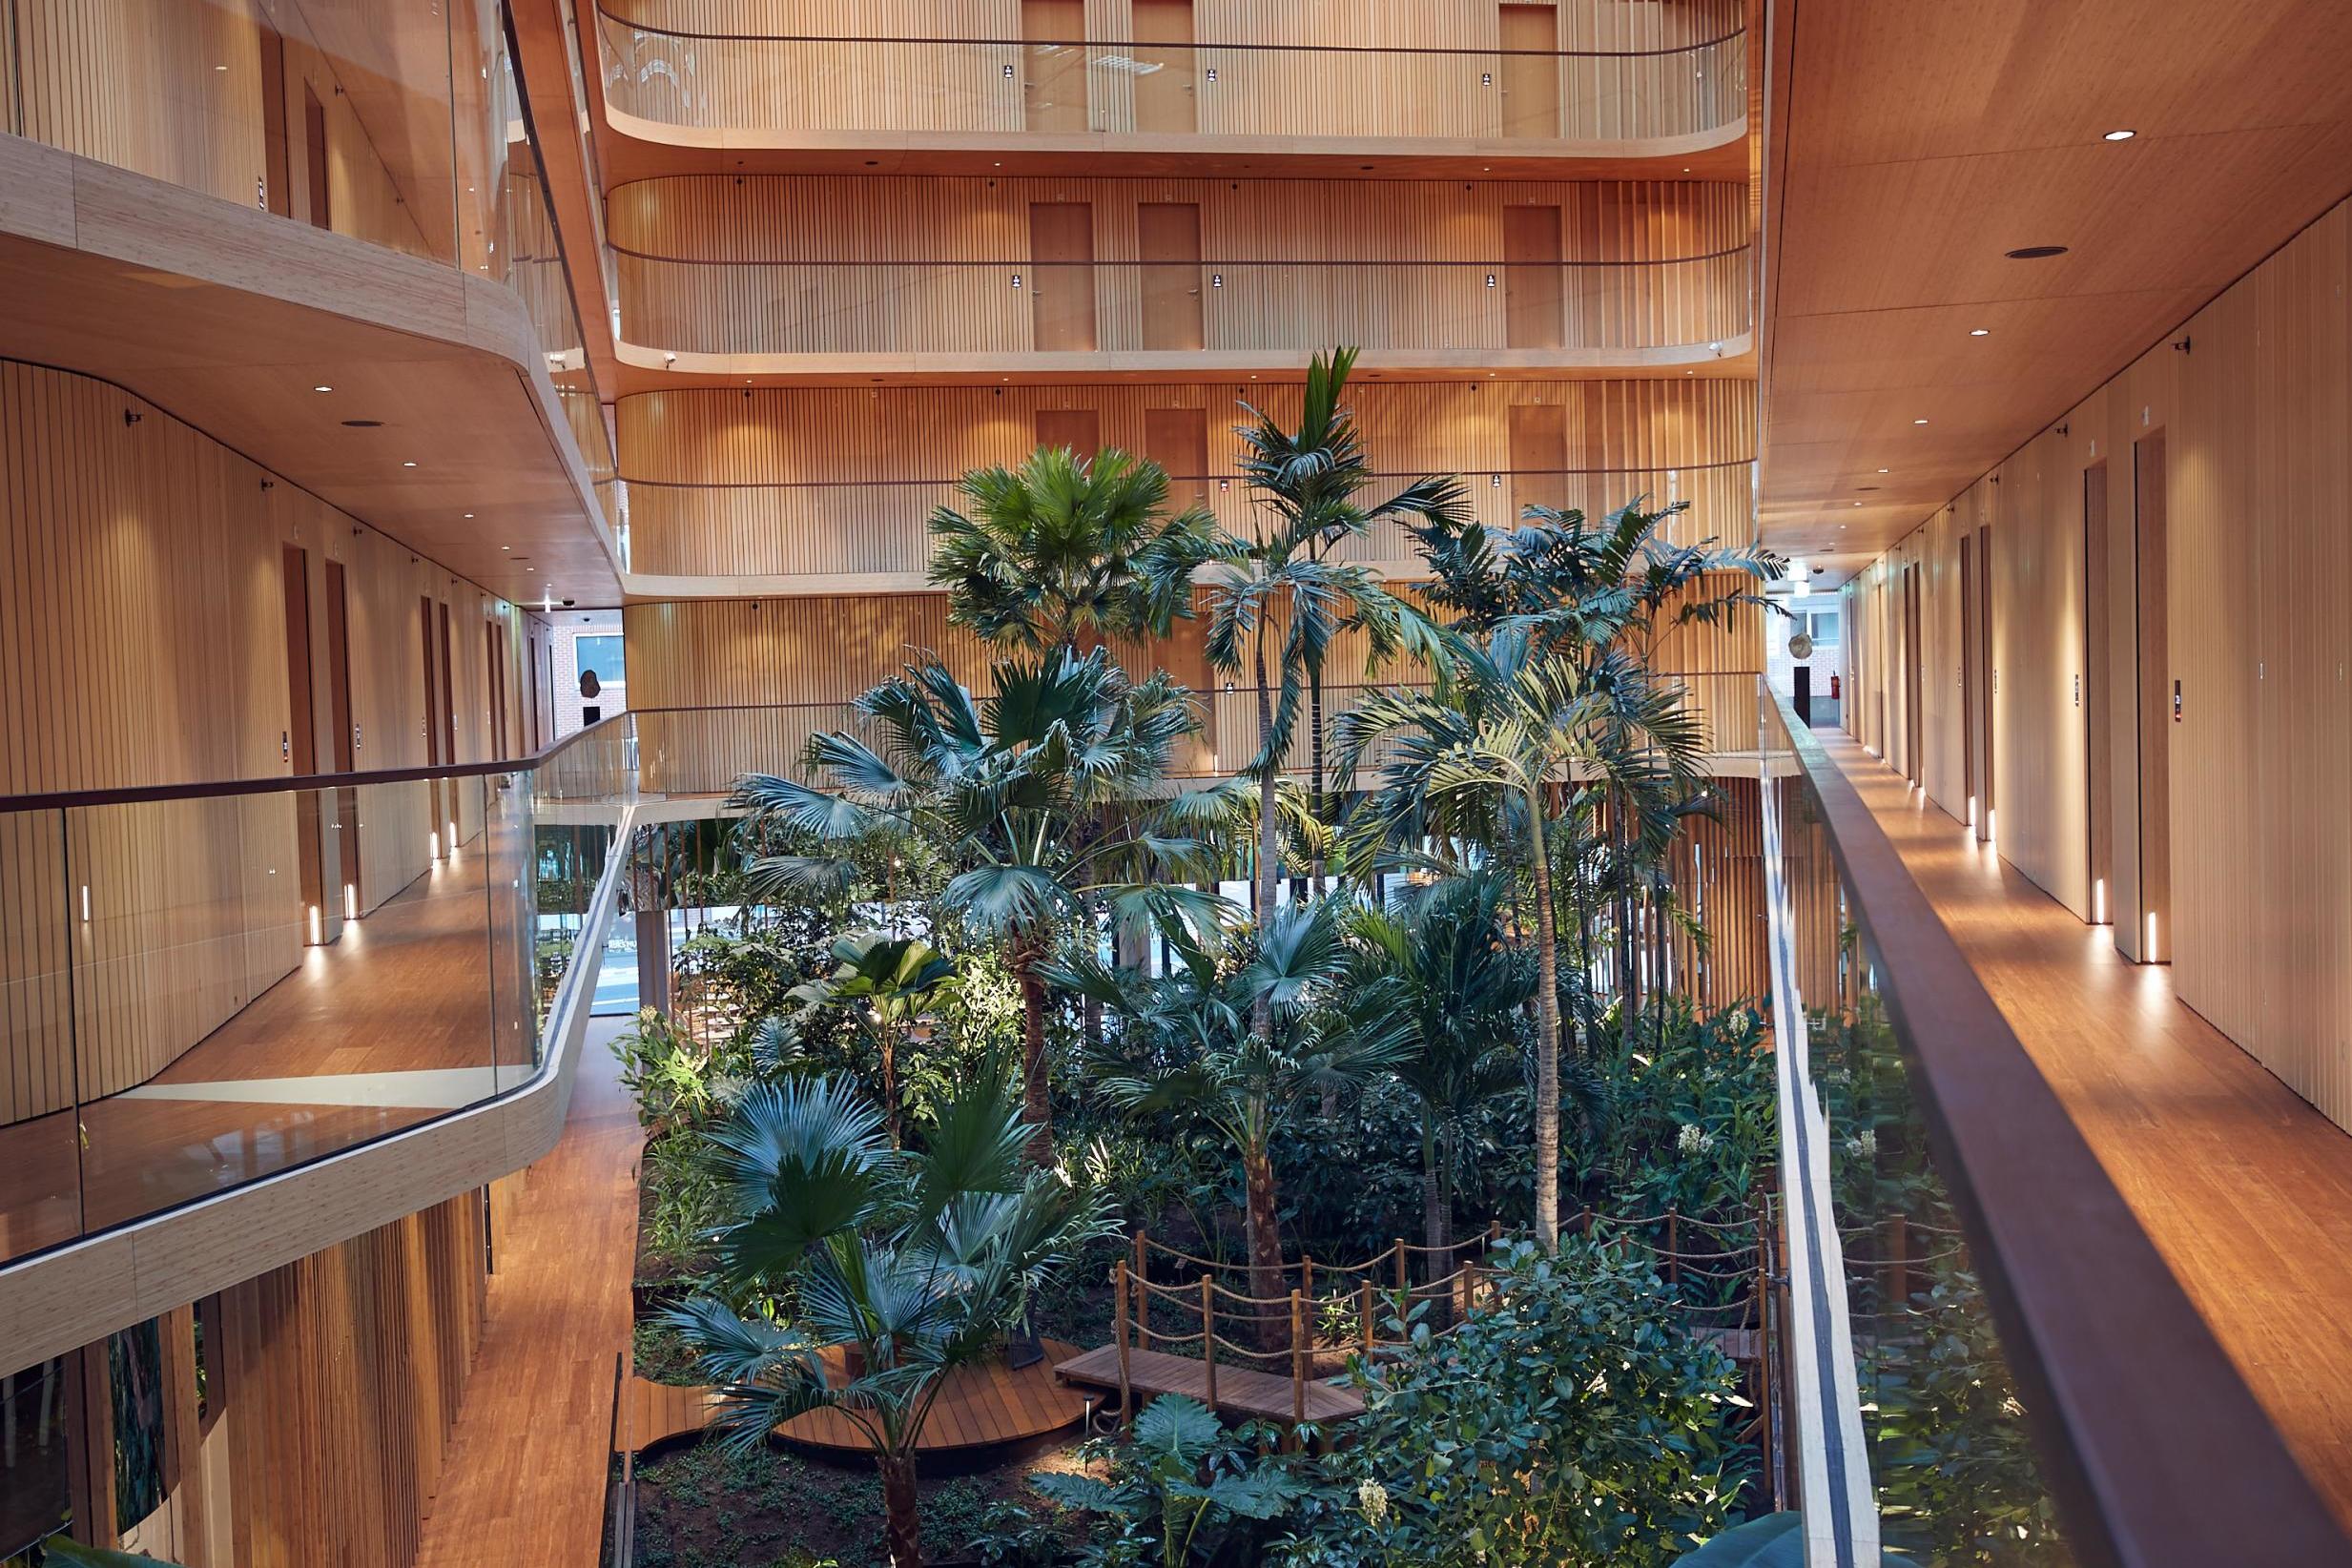 Hotel Jakarta Amsterdam is one of the greenest in the Netherlands